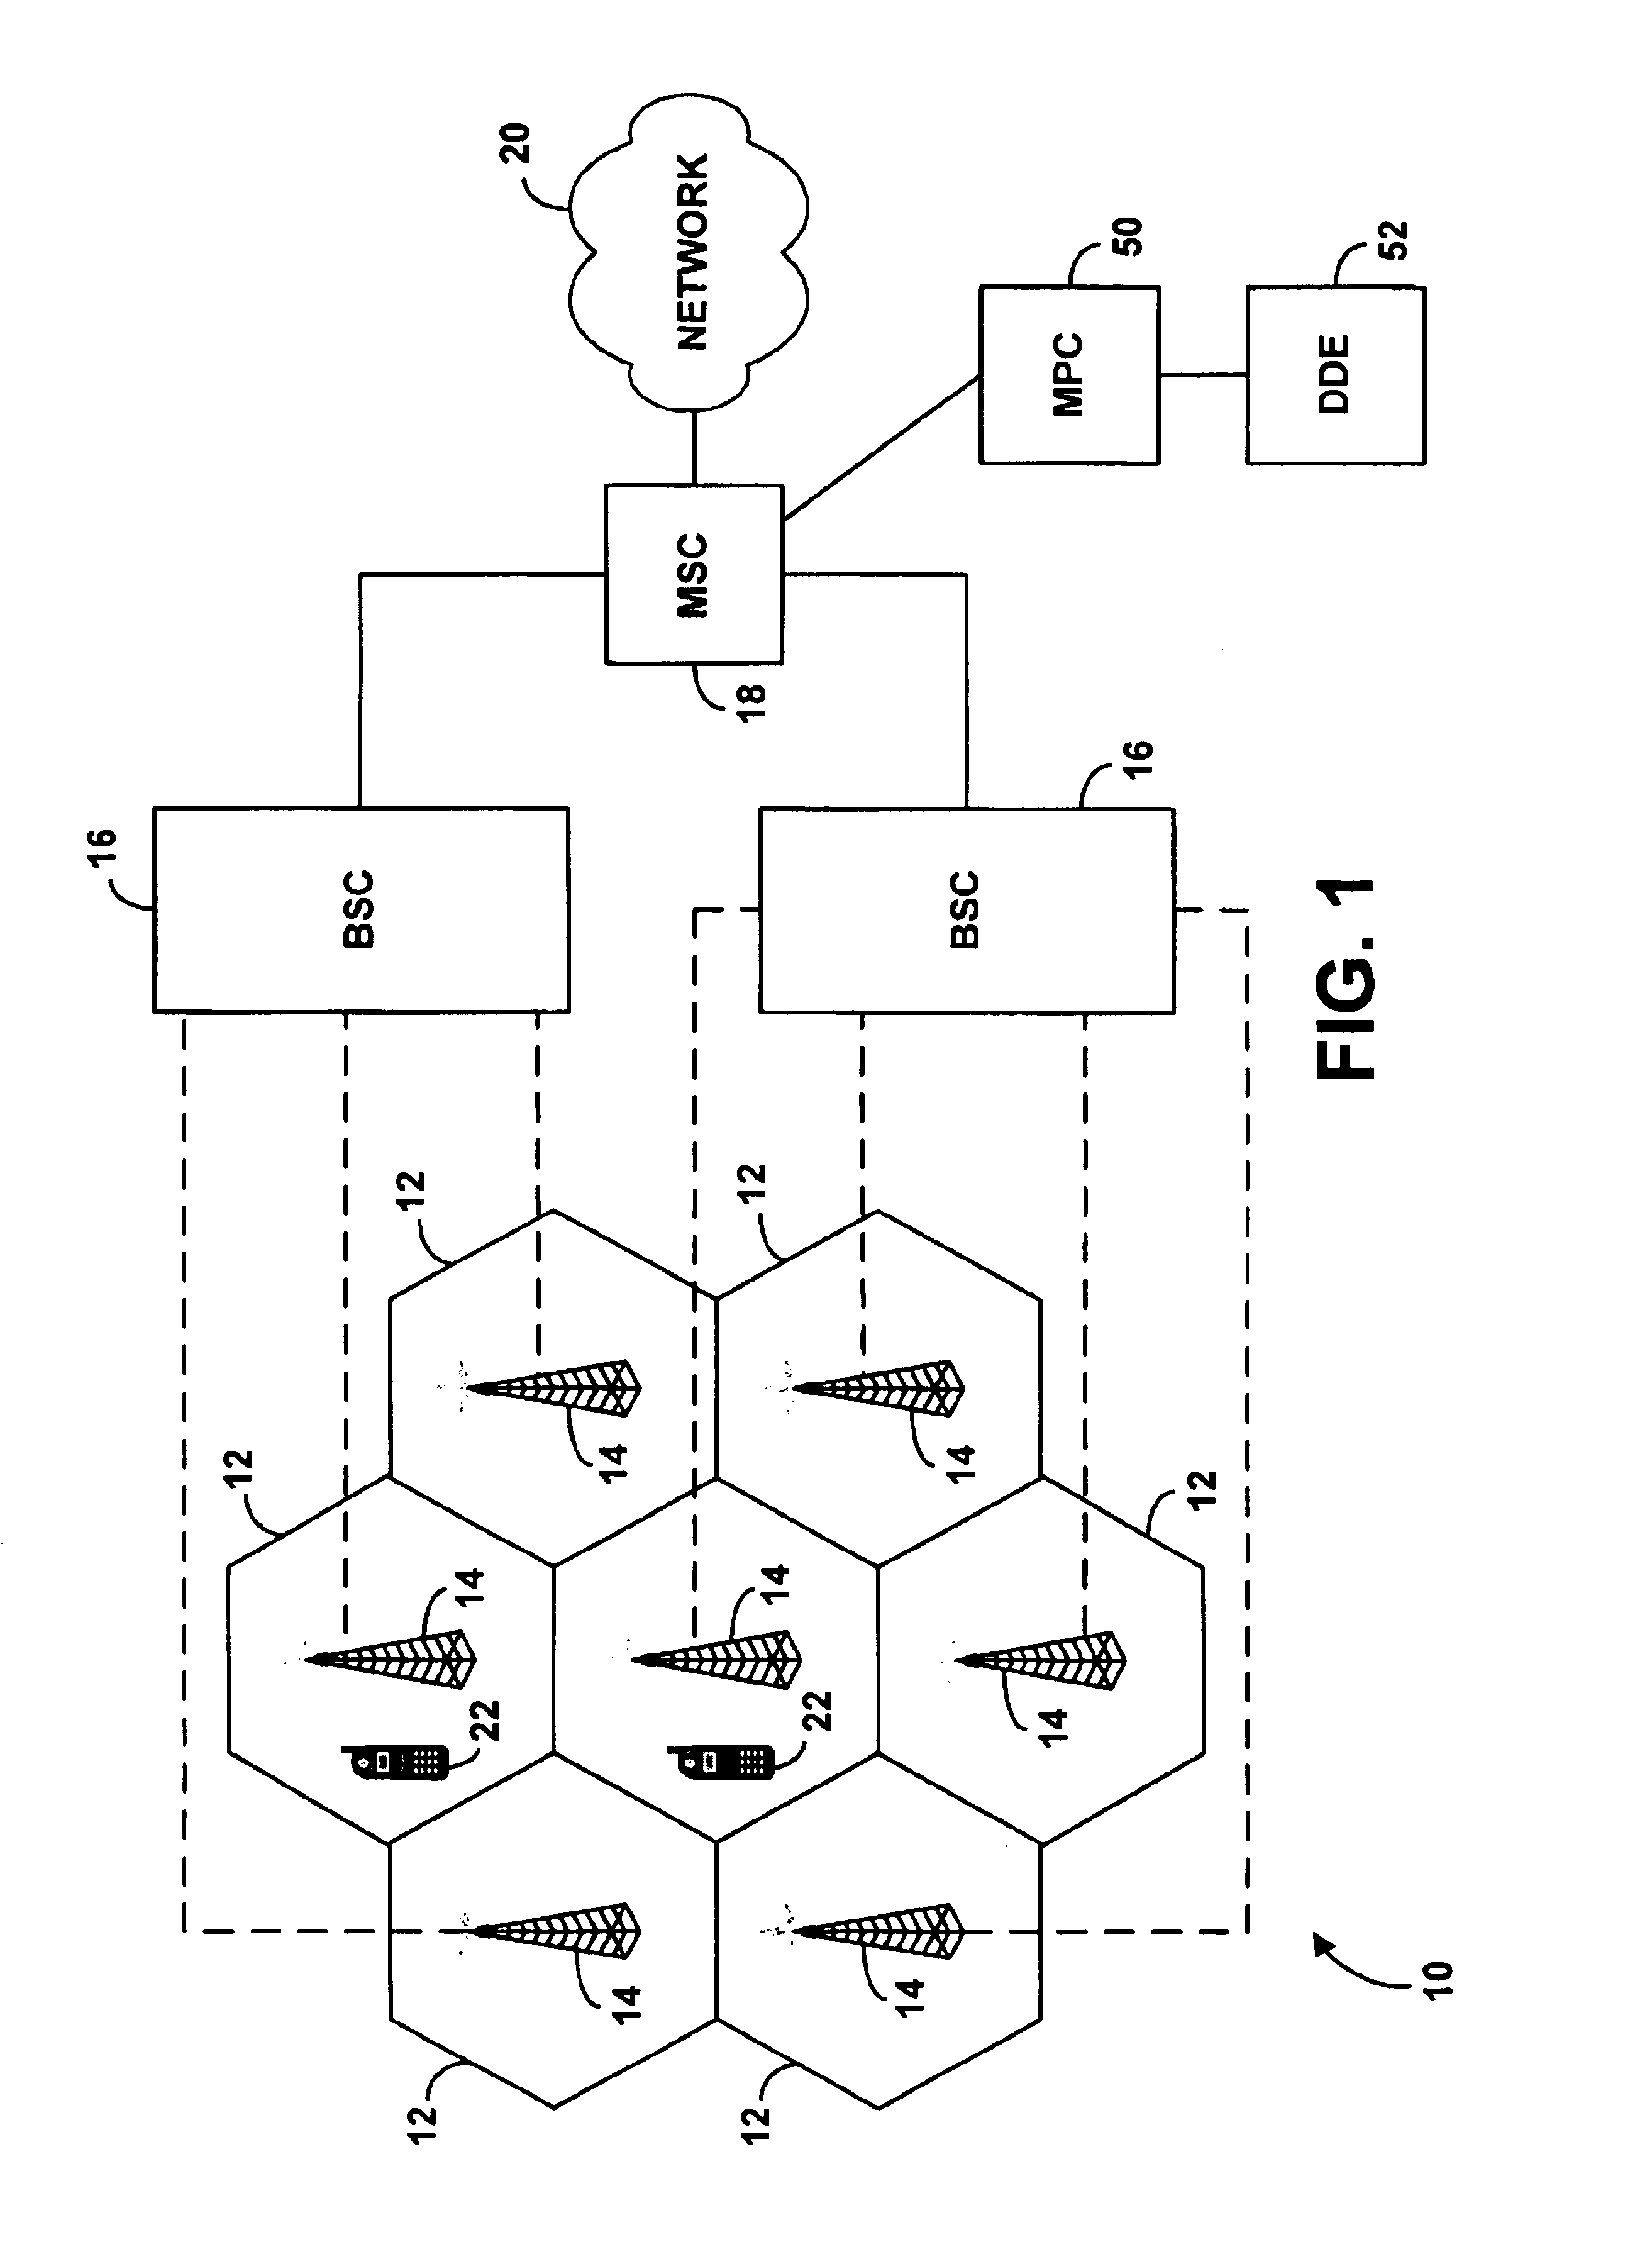 Method and system for inter-frequency handoff and capacity enhancement in a wireless telecommunications network